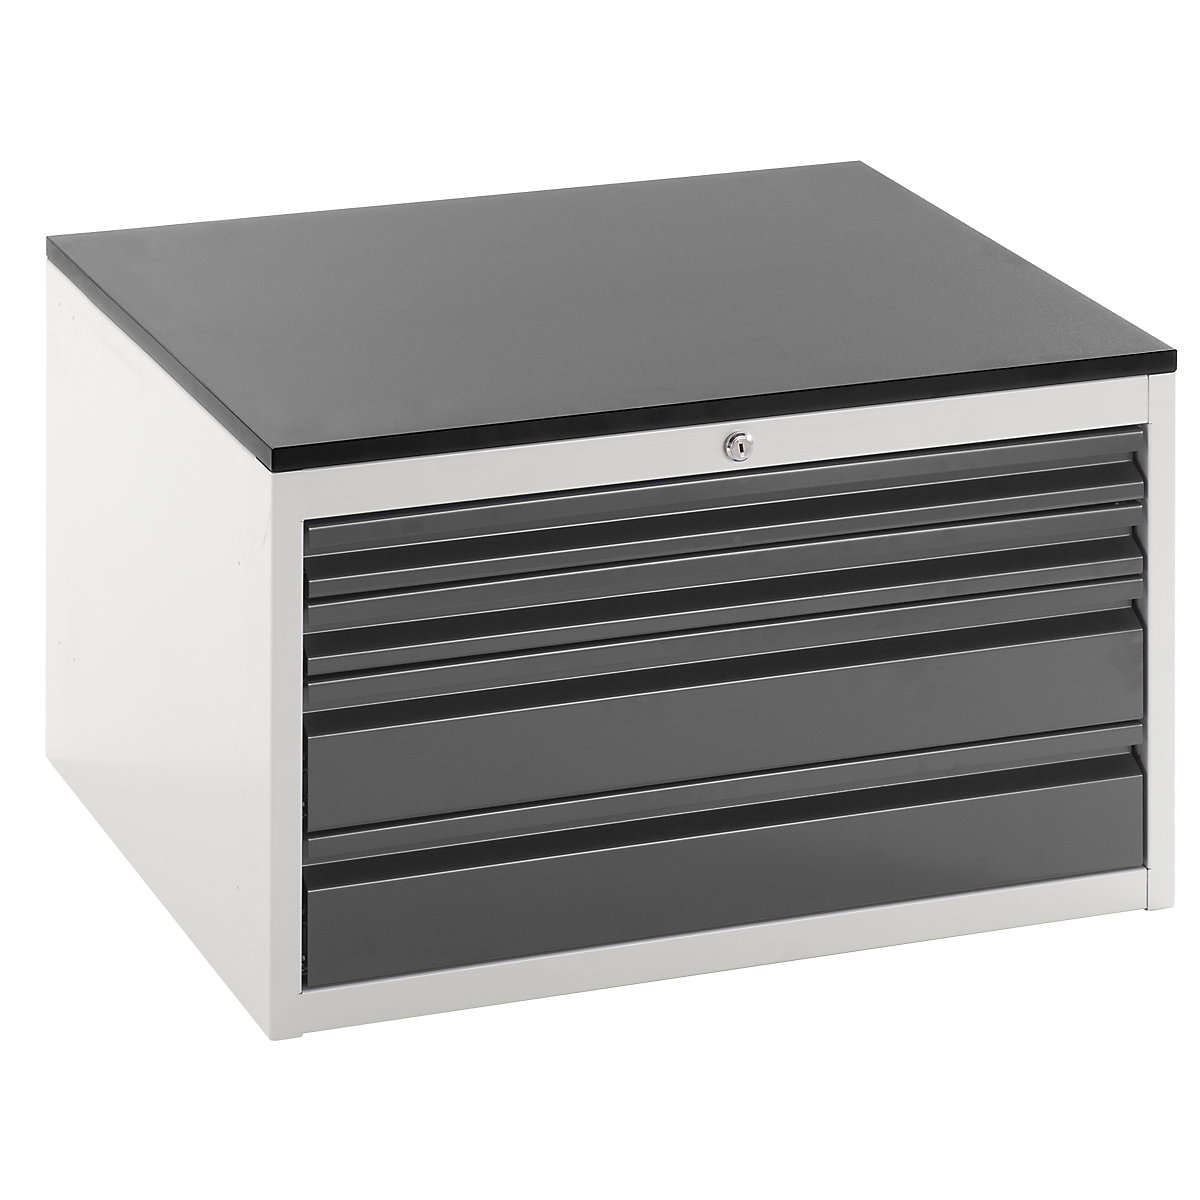 Drawer cupboard with telescopic guides – RAU, height 460 mm, drawers: 2 x 60, 2 x 120 mm, light grey / charcoal, width 770 mm-6